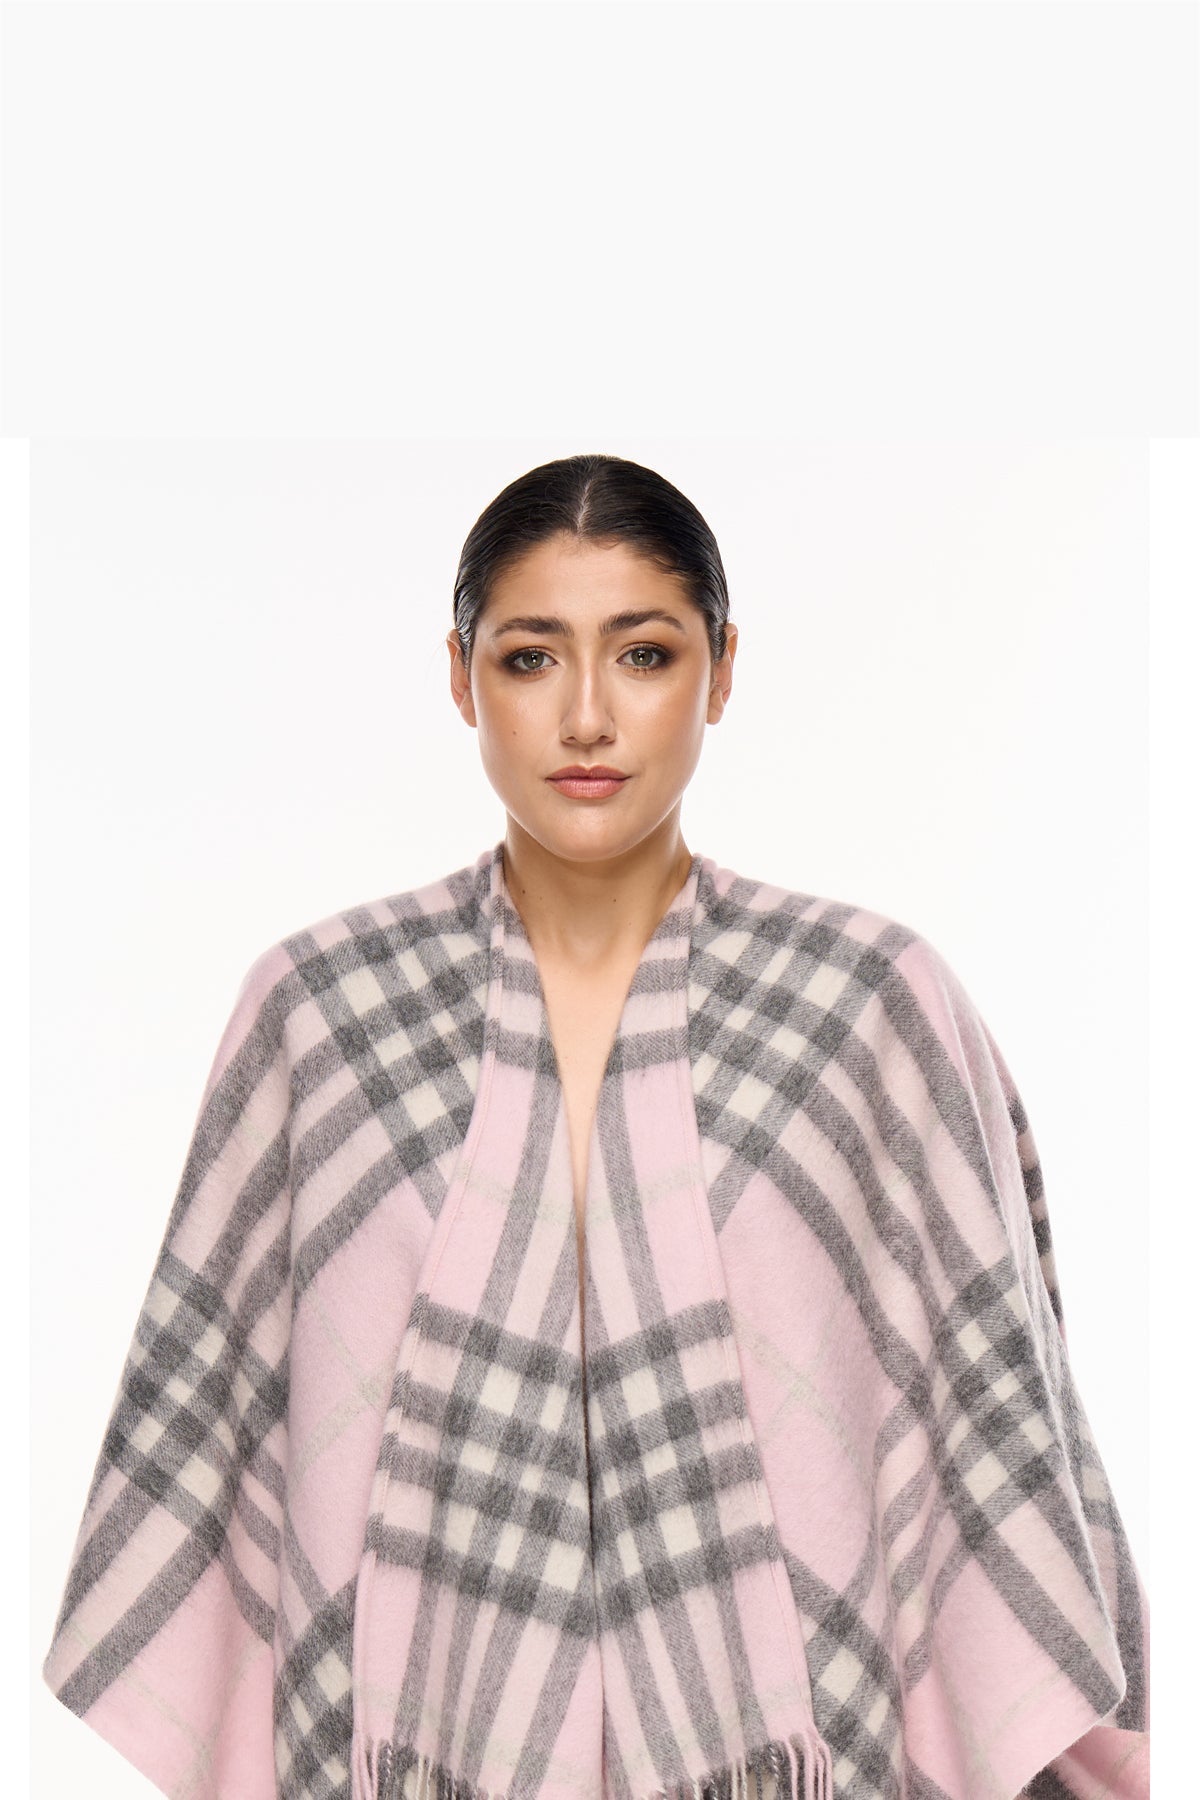 Cape DC Classic Pink Poncho 100% Pure Lambswool